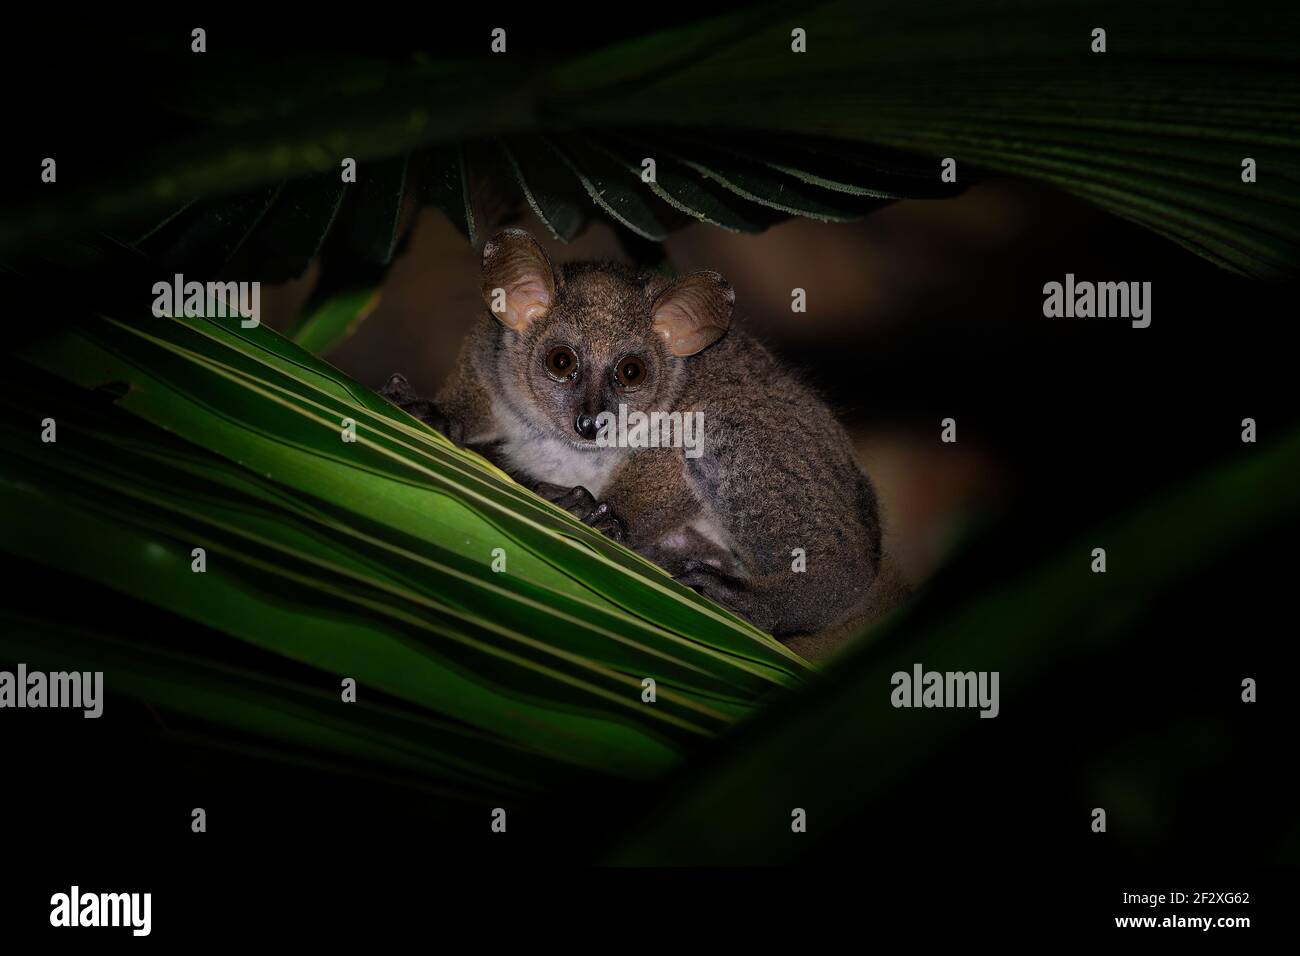 Northern Greater Galago - Otolemur garnettii also Garnett greater galago or Small-eared Greater Galago, nocturnal, arboreal primate endemic to Africa, Stock Photo